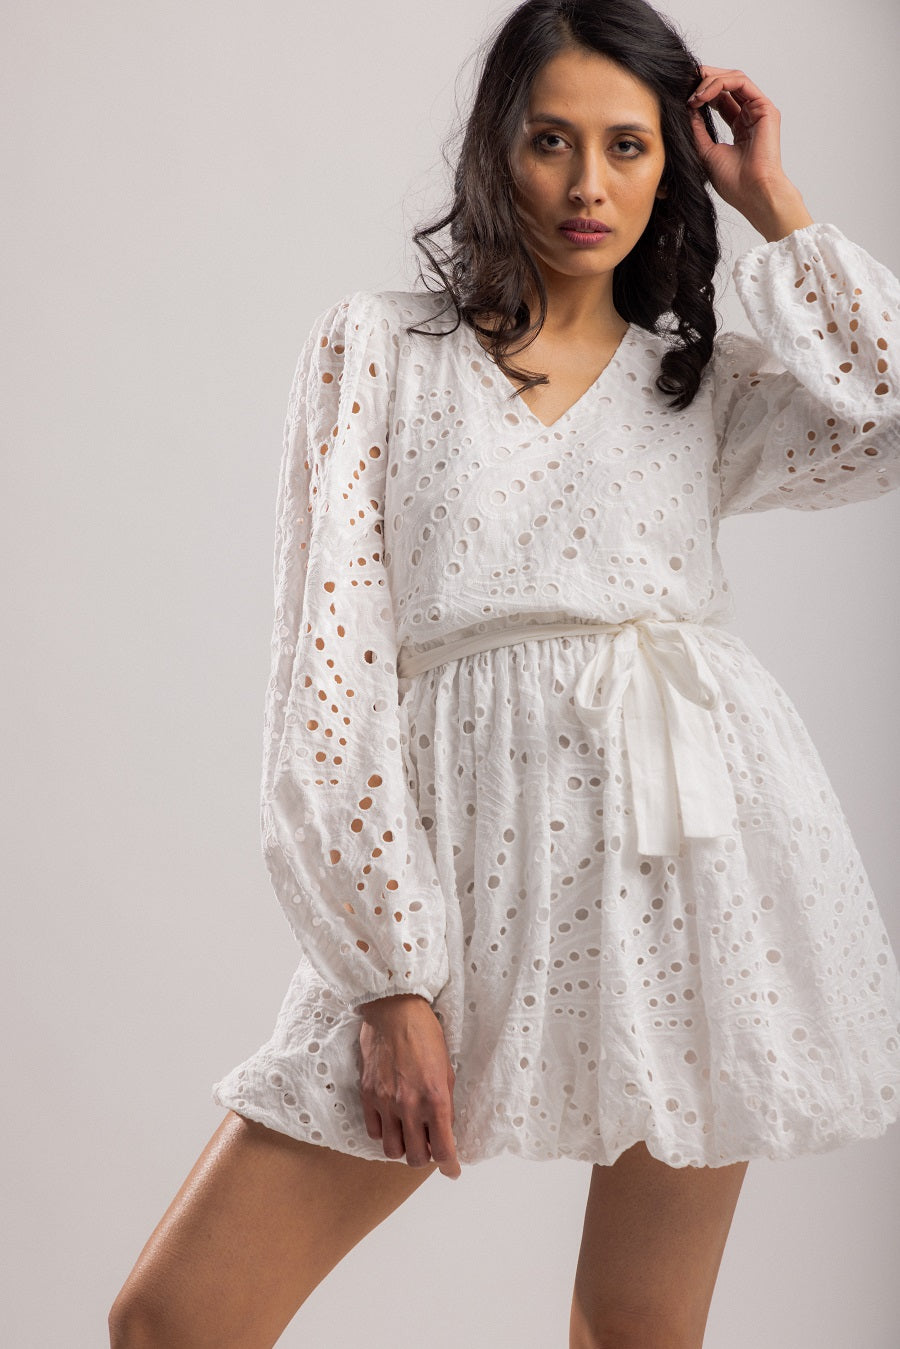 Oyster Dress - White Lace